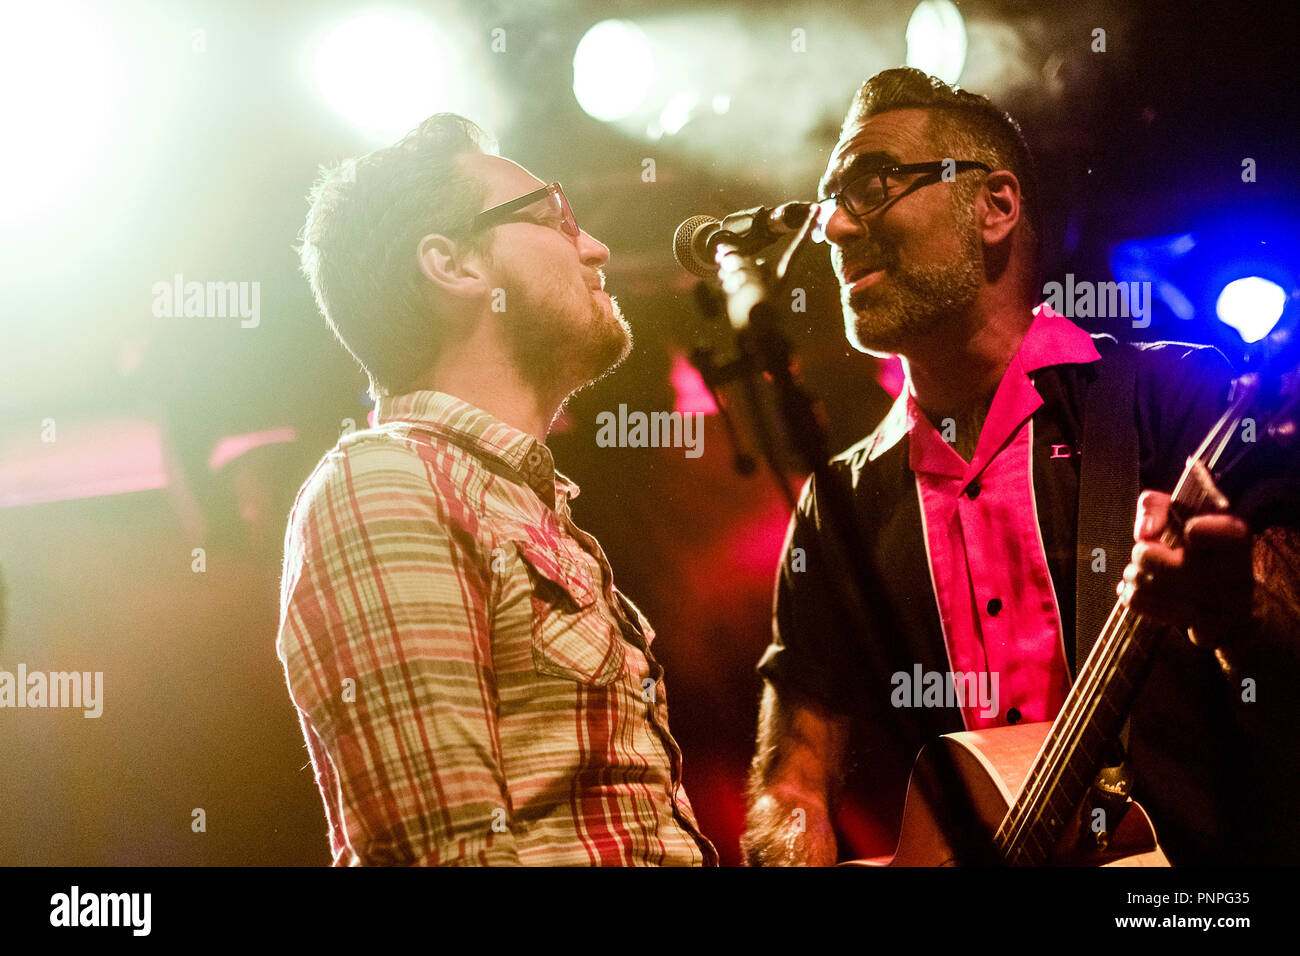 London, UK. 21st September 2018. The Dodge Brothers plays The Garage on Friday 21 September 2018 held at The Garage, London. Pictured:  Billy Lunn, from the band, The Subways, joins the band on stage. Picture by Julie Edwards. Credit: Julie Edwards/Alamy Live News Credit: Julie Edwards/Alamy Live News Stock Photo